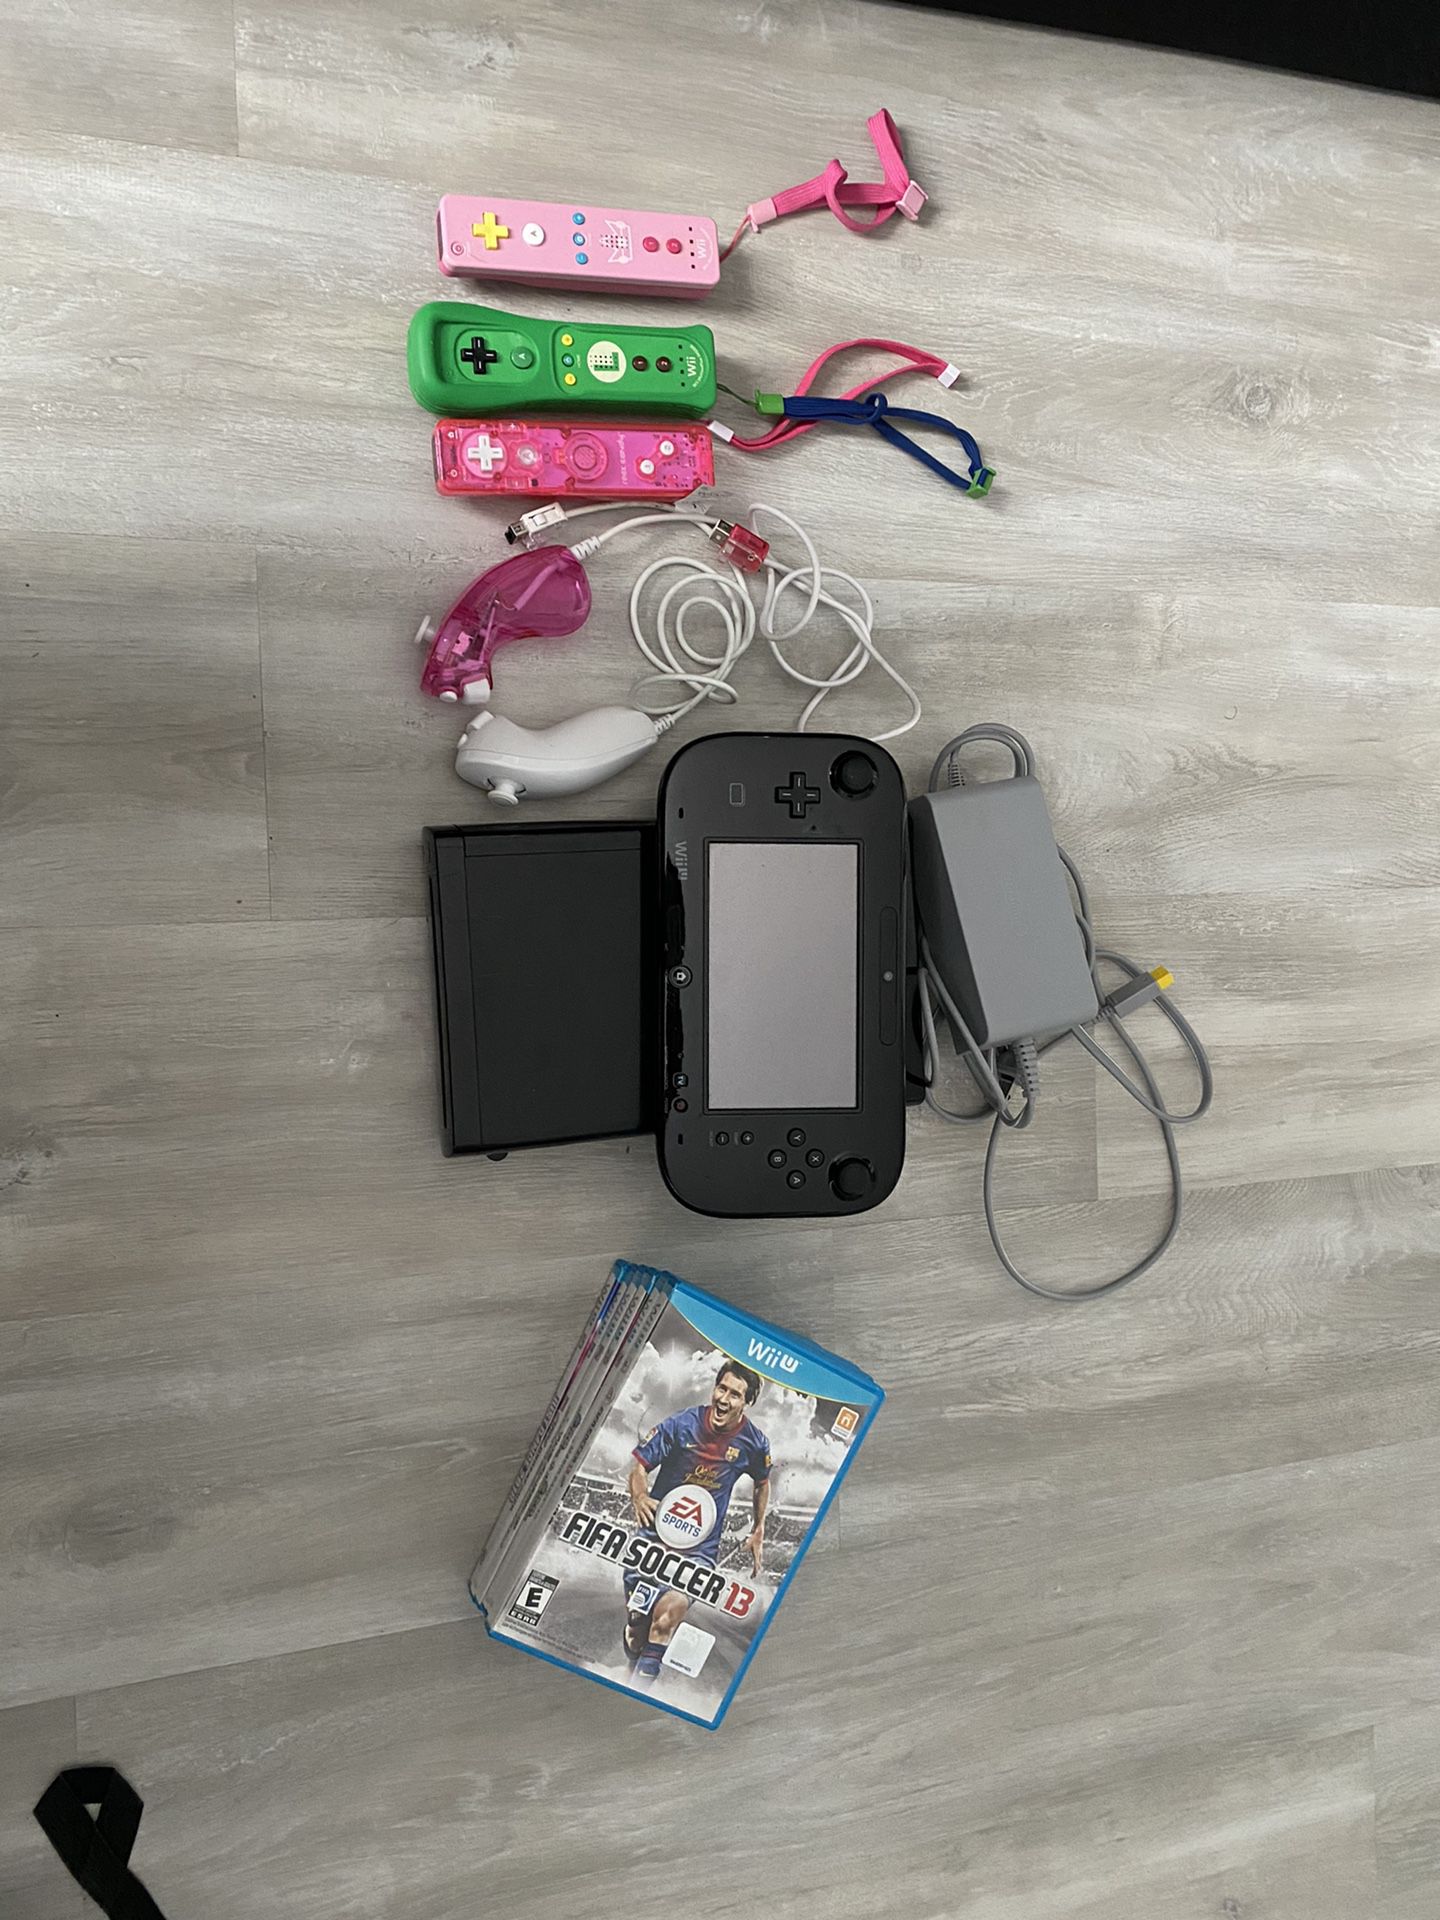 Wii U with games